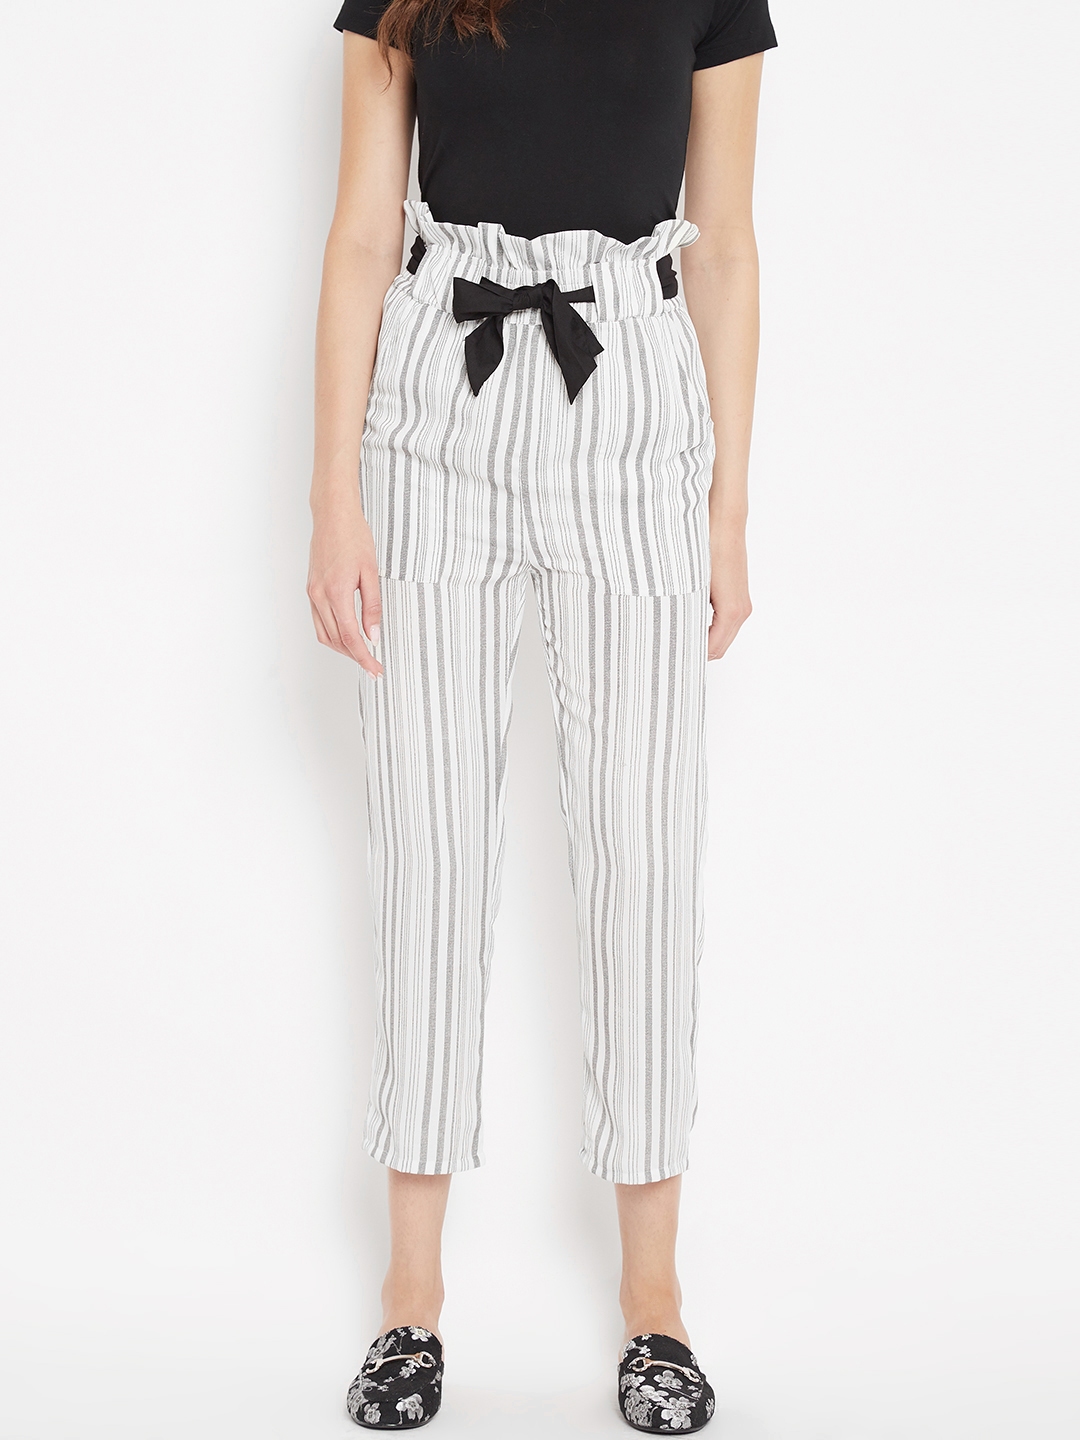 Buy PANIT Women Off White & Black Regular Fit Striped Cropped Trousers - Trousers for Women 